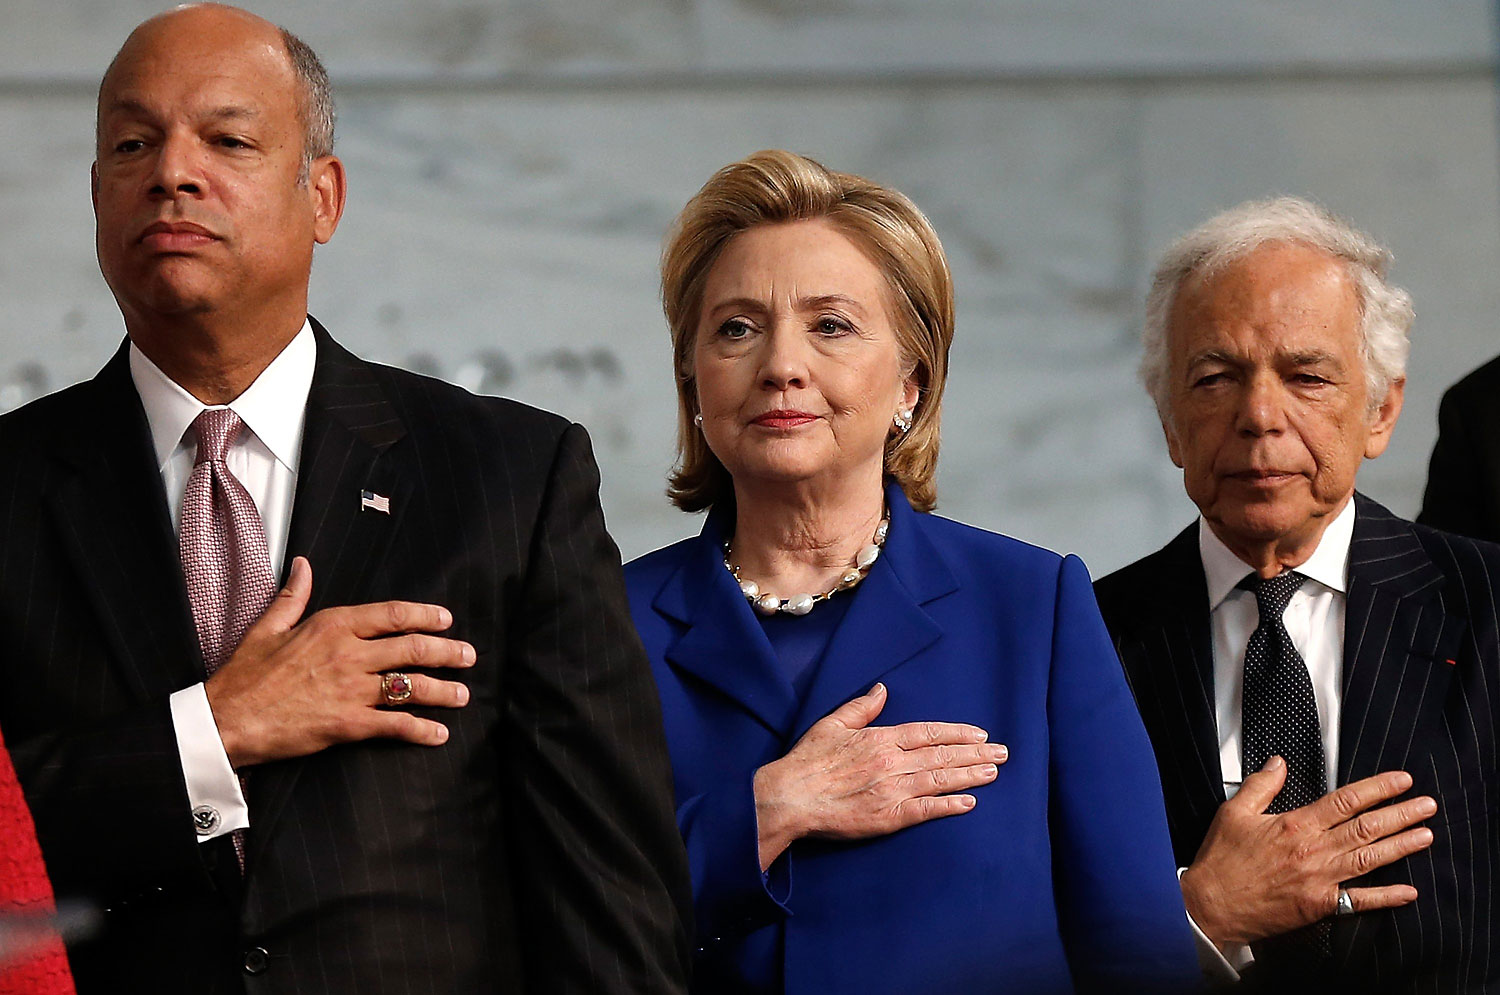 Jeh Johnson And Hillary Clinton Attend Naturalization Ceremony In DC